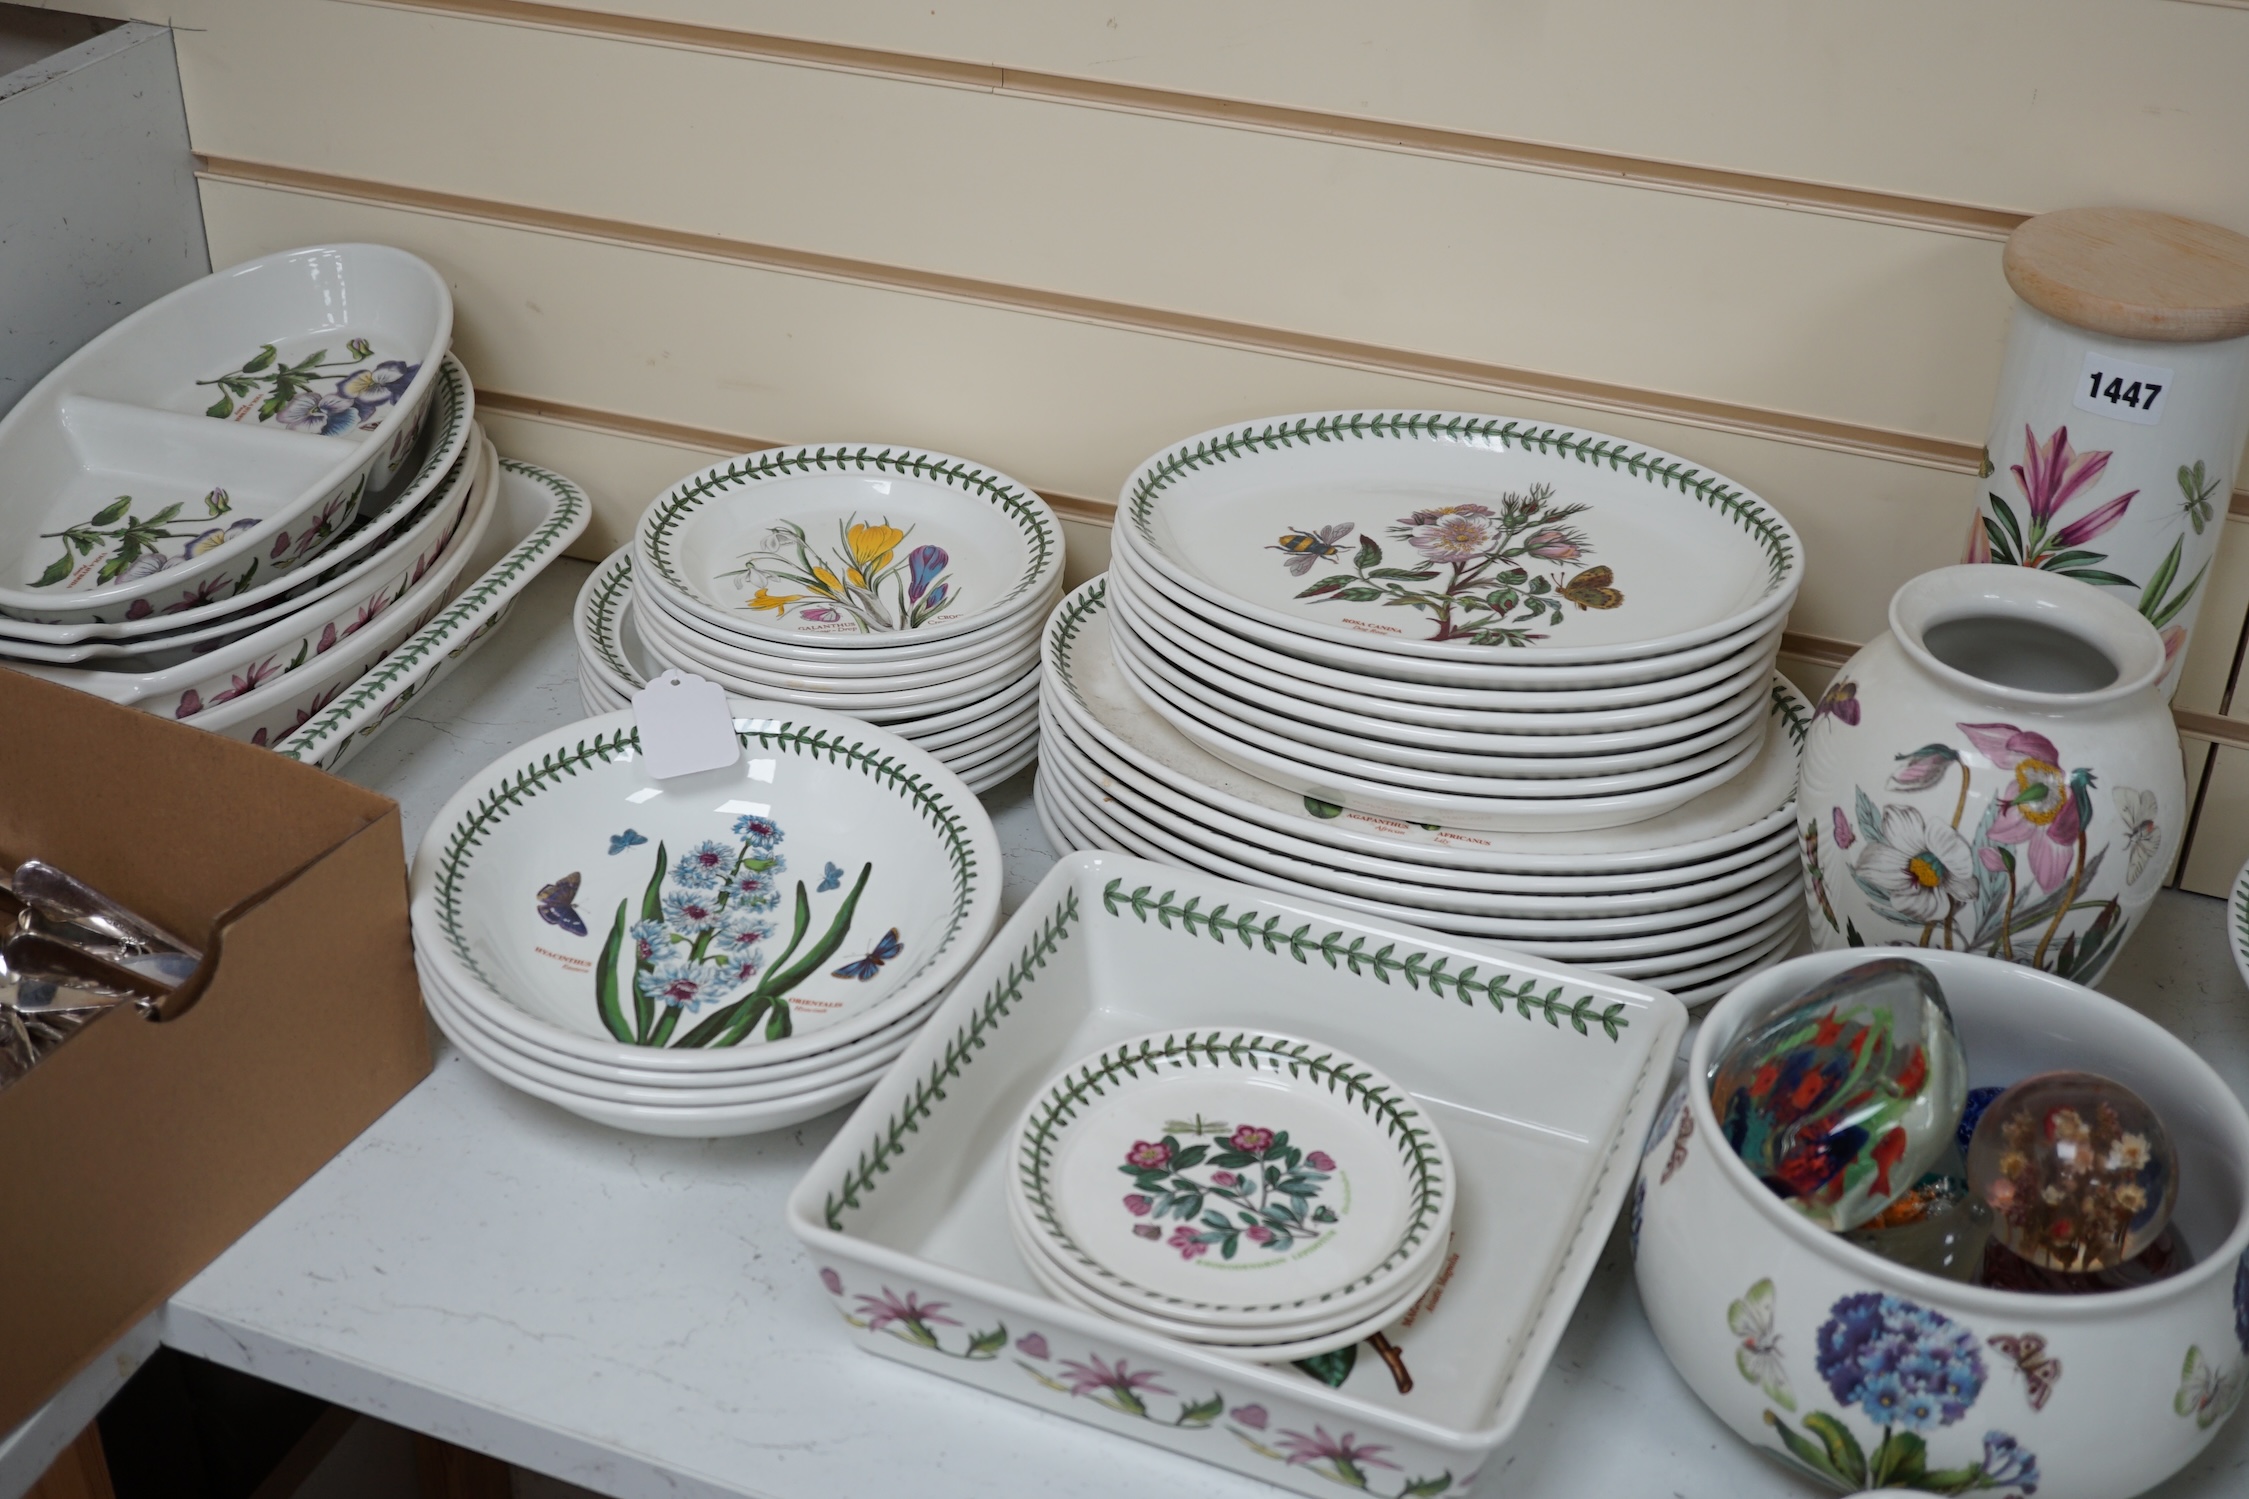 A large quantity of Portmeirion 'Botanic Gardens' tea, dinner and kitchen wares, together with cutlery and seven glass paperweights